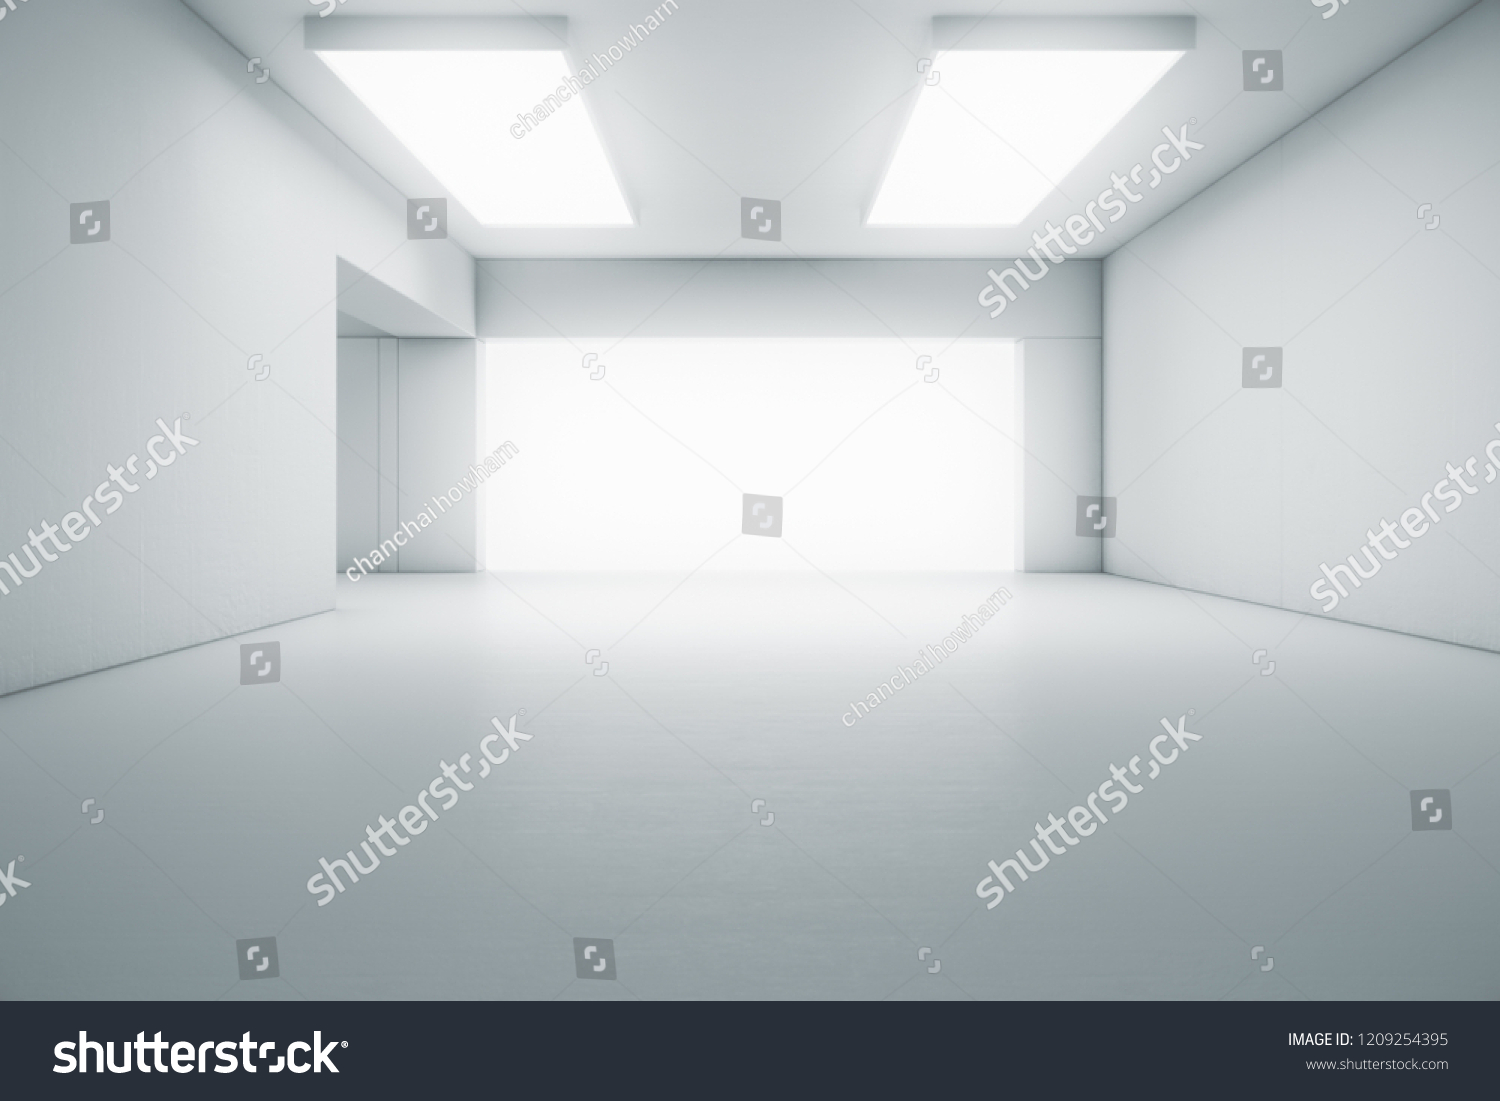 Empty Abstract White Room Gate Glowing Stock Illustration 1209254395 ...